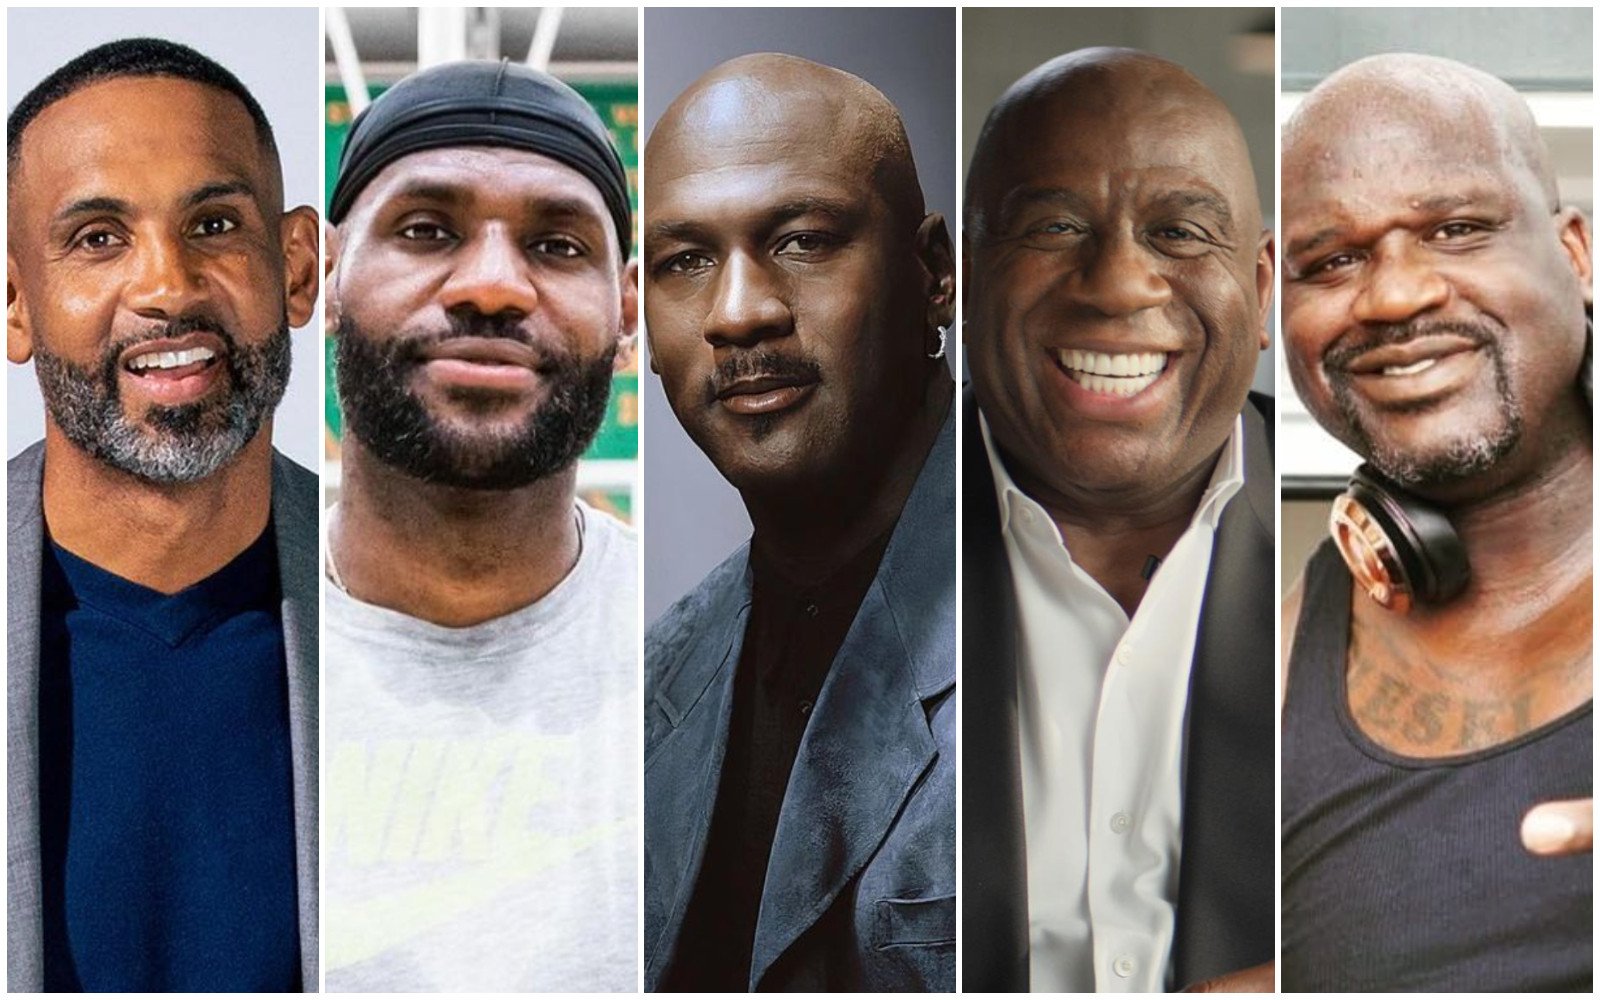 Grant Hill, LeBron James, Michael Jordan, Magic Johnson and Shaquille O’Neal made bank on the court – and millions off it too. Photos: @realgranthill, @lebron, @airjordantalk, @appletv, @shaquille_oneal_fc84/Instagram
